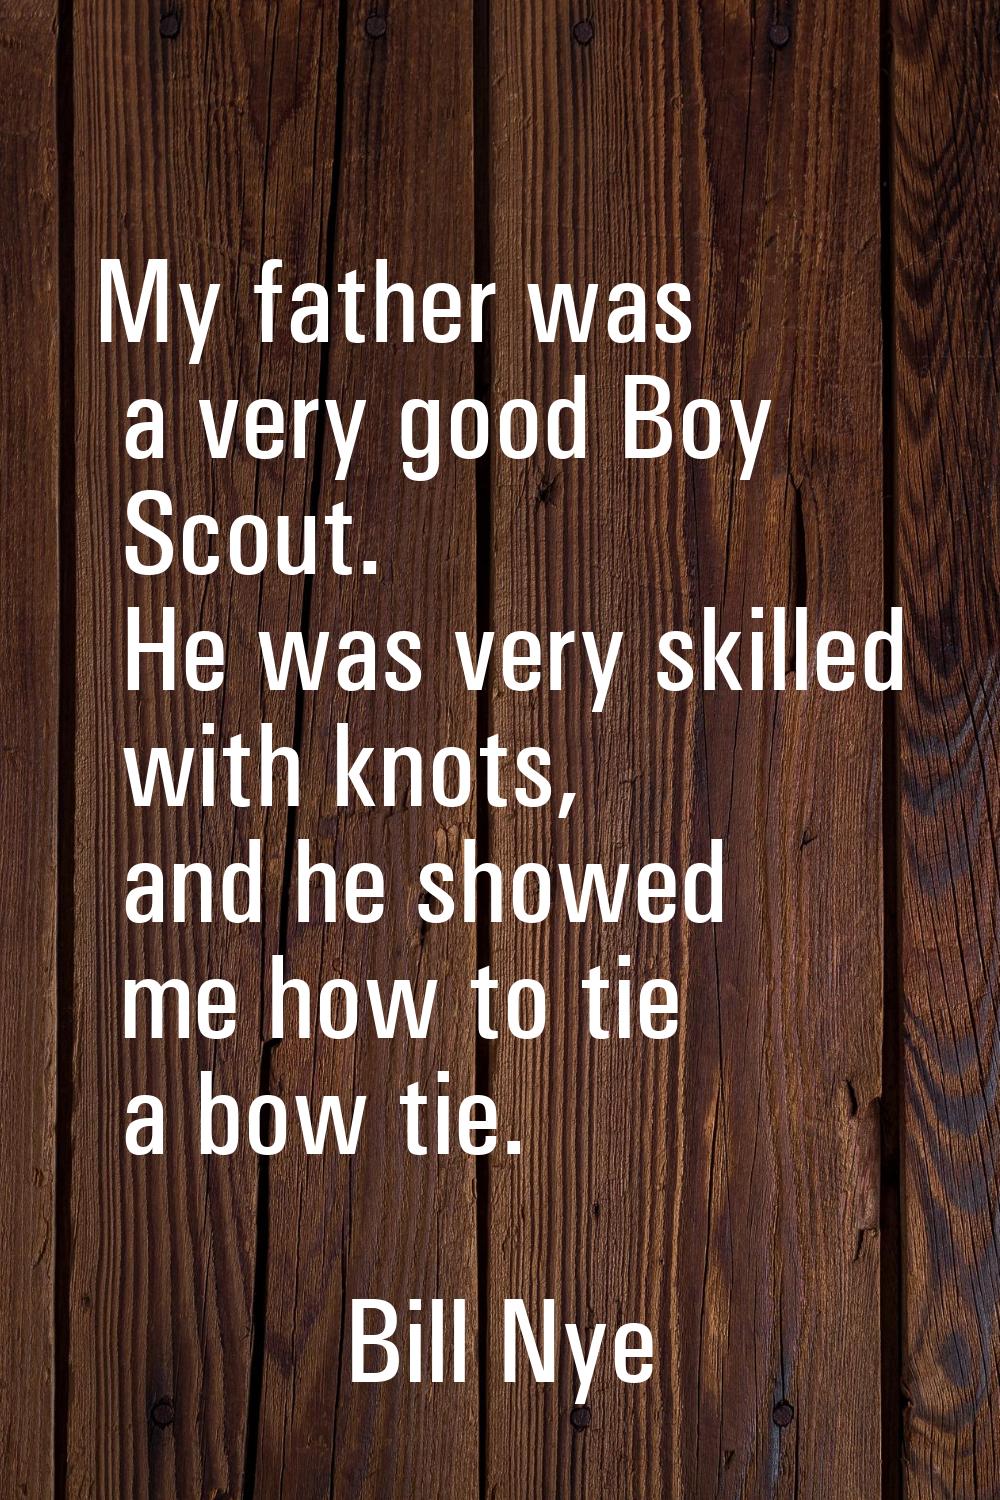 My father was a very good Boy Scout. He was very skilled with knots, and he showed me how to tie a 